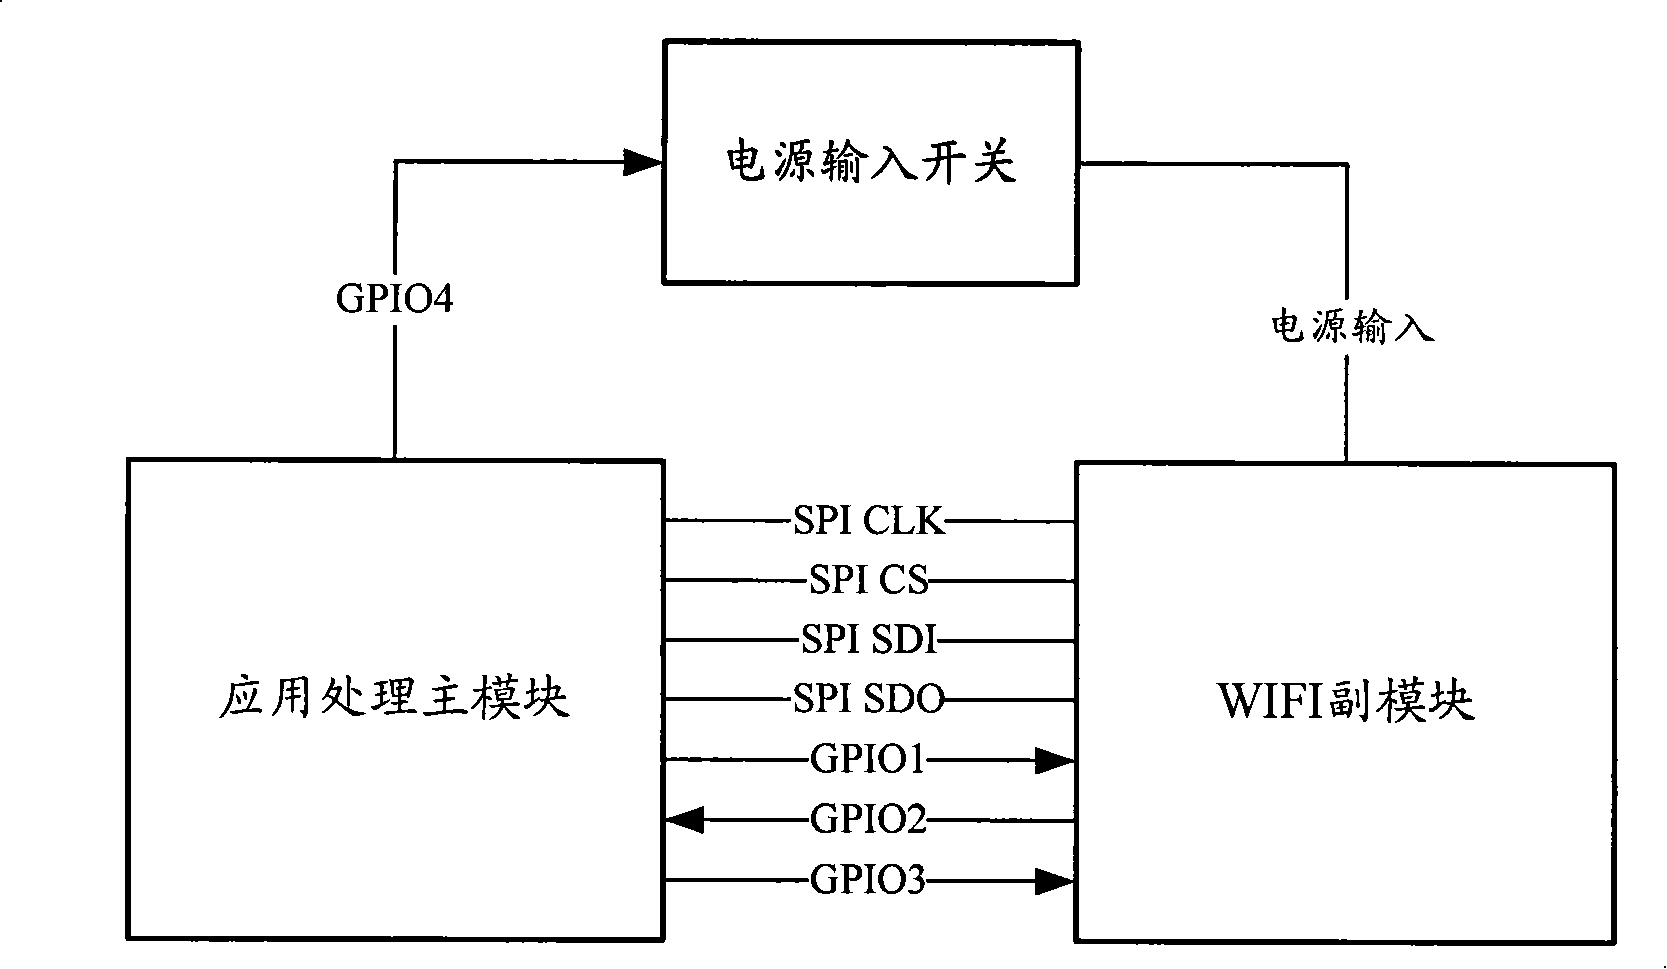 Multimode mobile terminal and method for implementing VoIP business